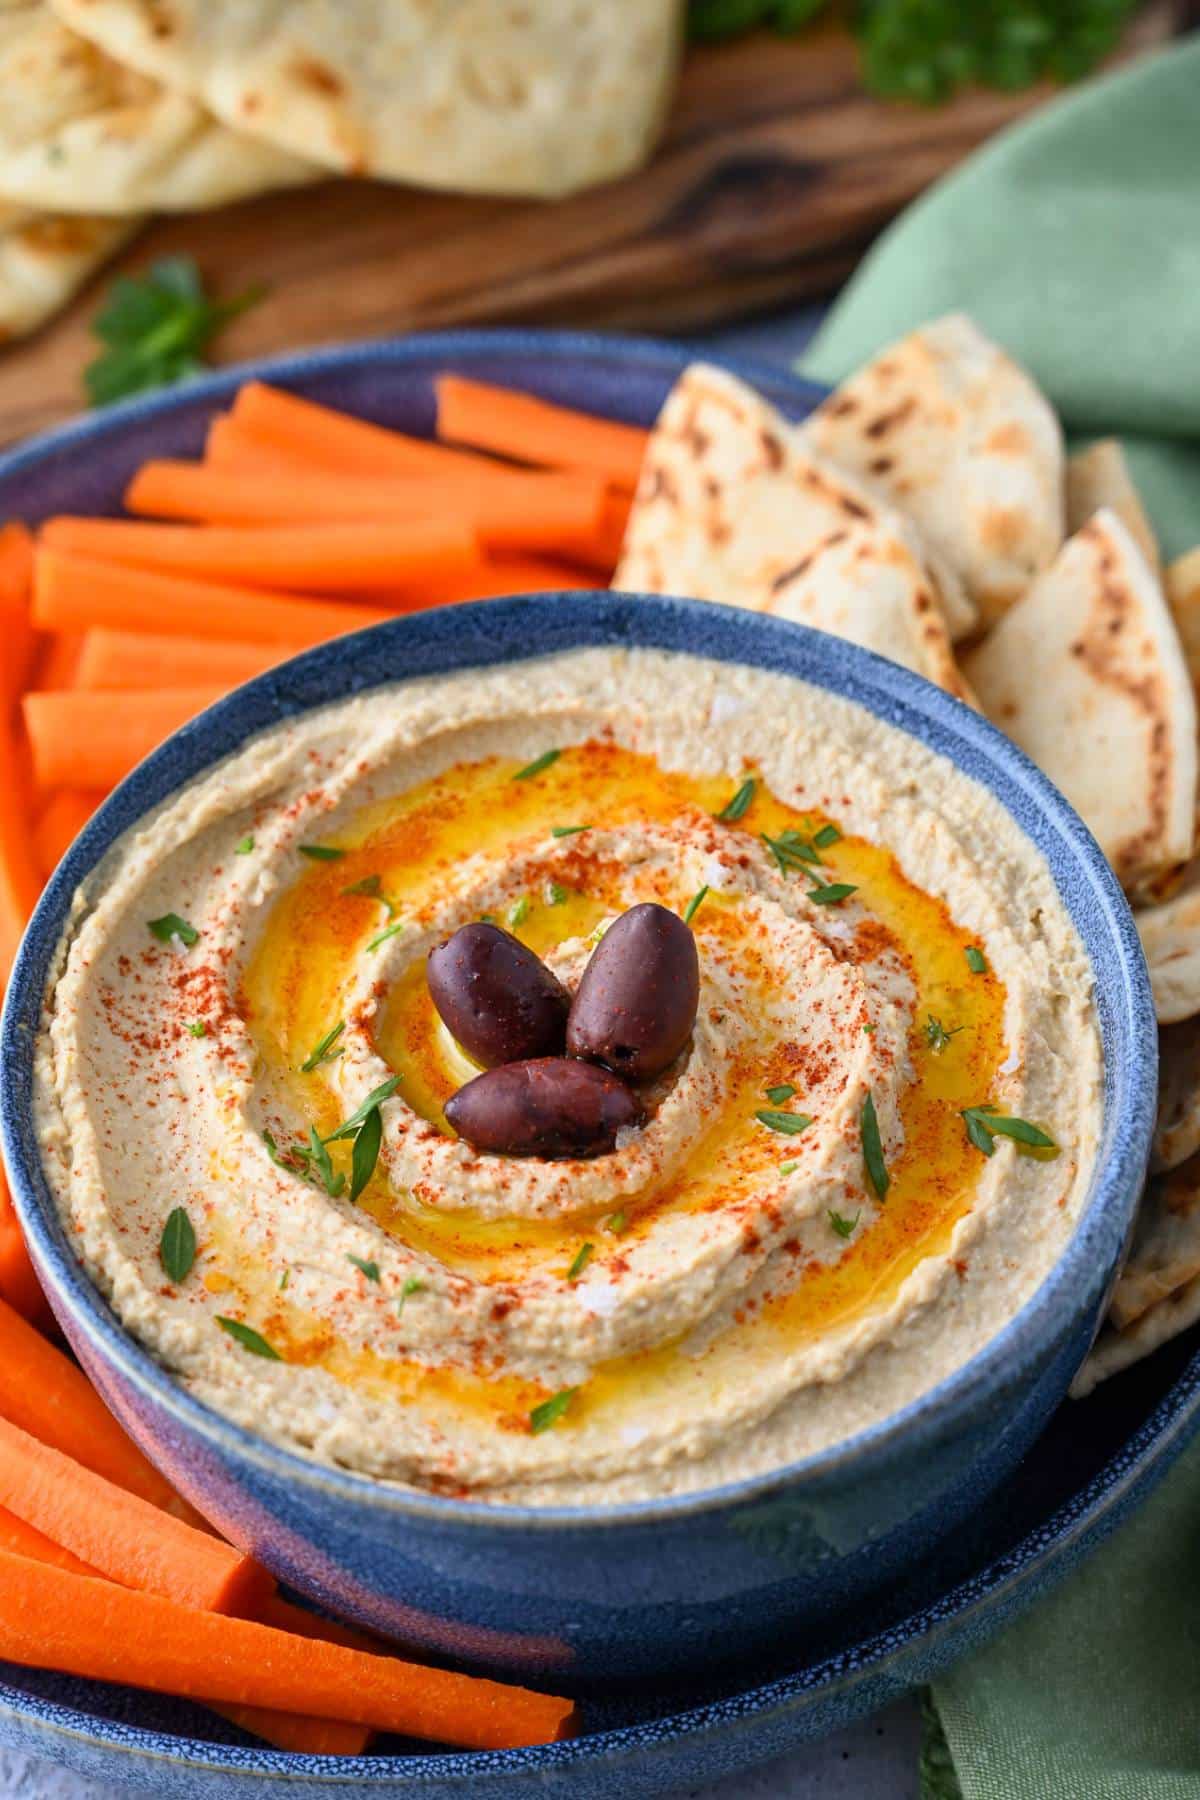 a platter of protein packed hummus with carrots and pita bread with a cutting board with bread and a cloth napkin behind it